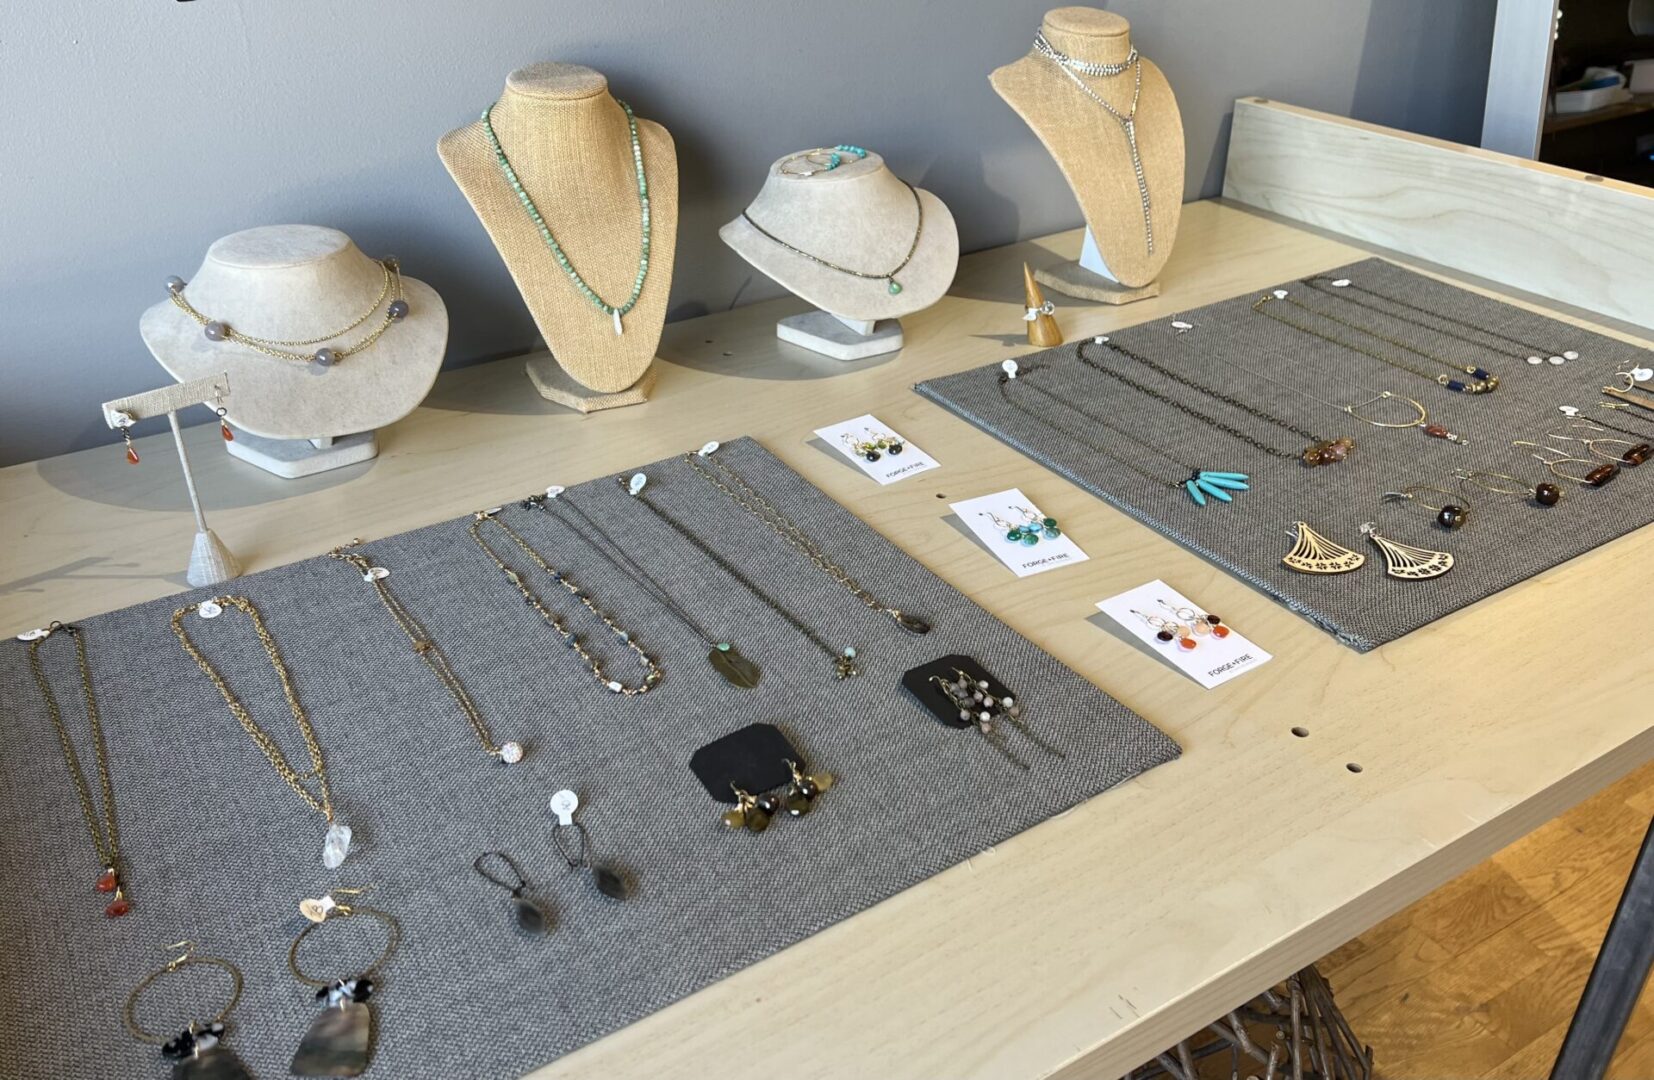 A display of necklaces and earrings